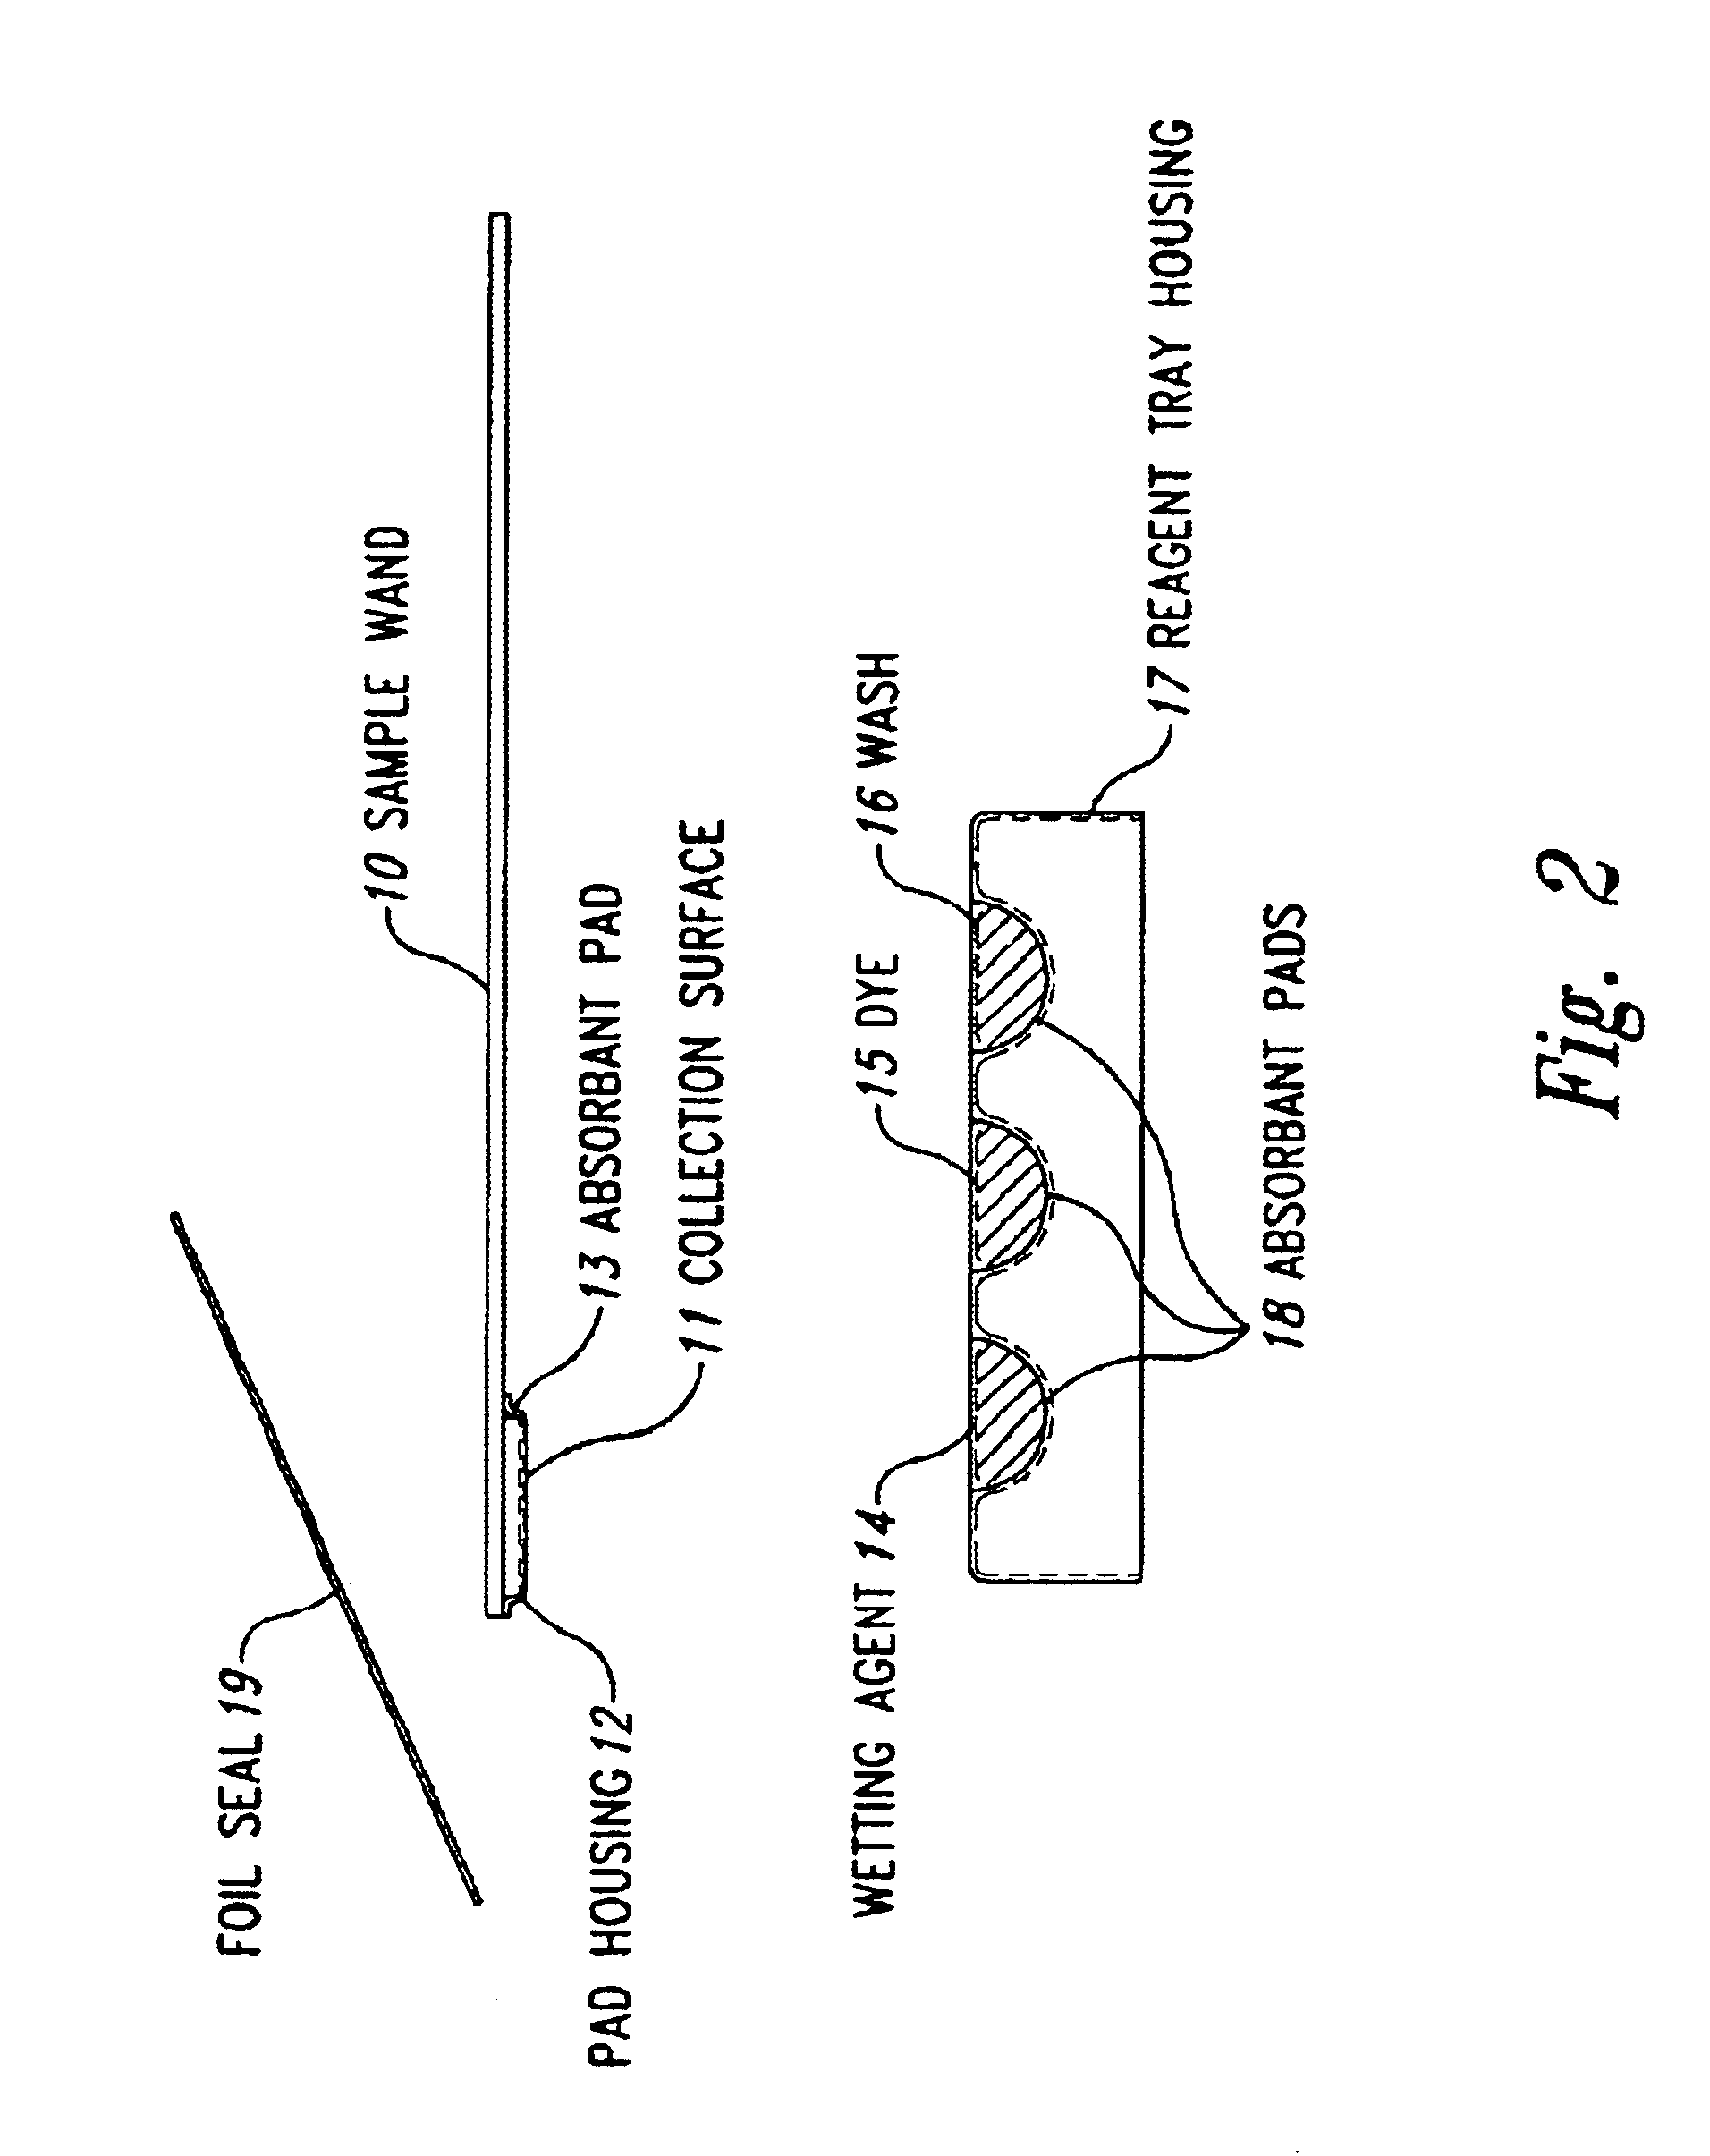 Self-contained devices for detecting biological contaminants